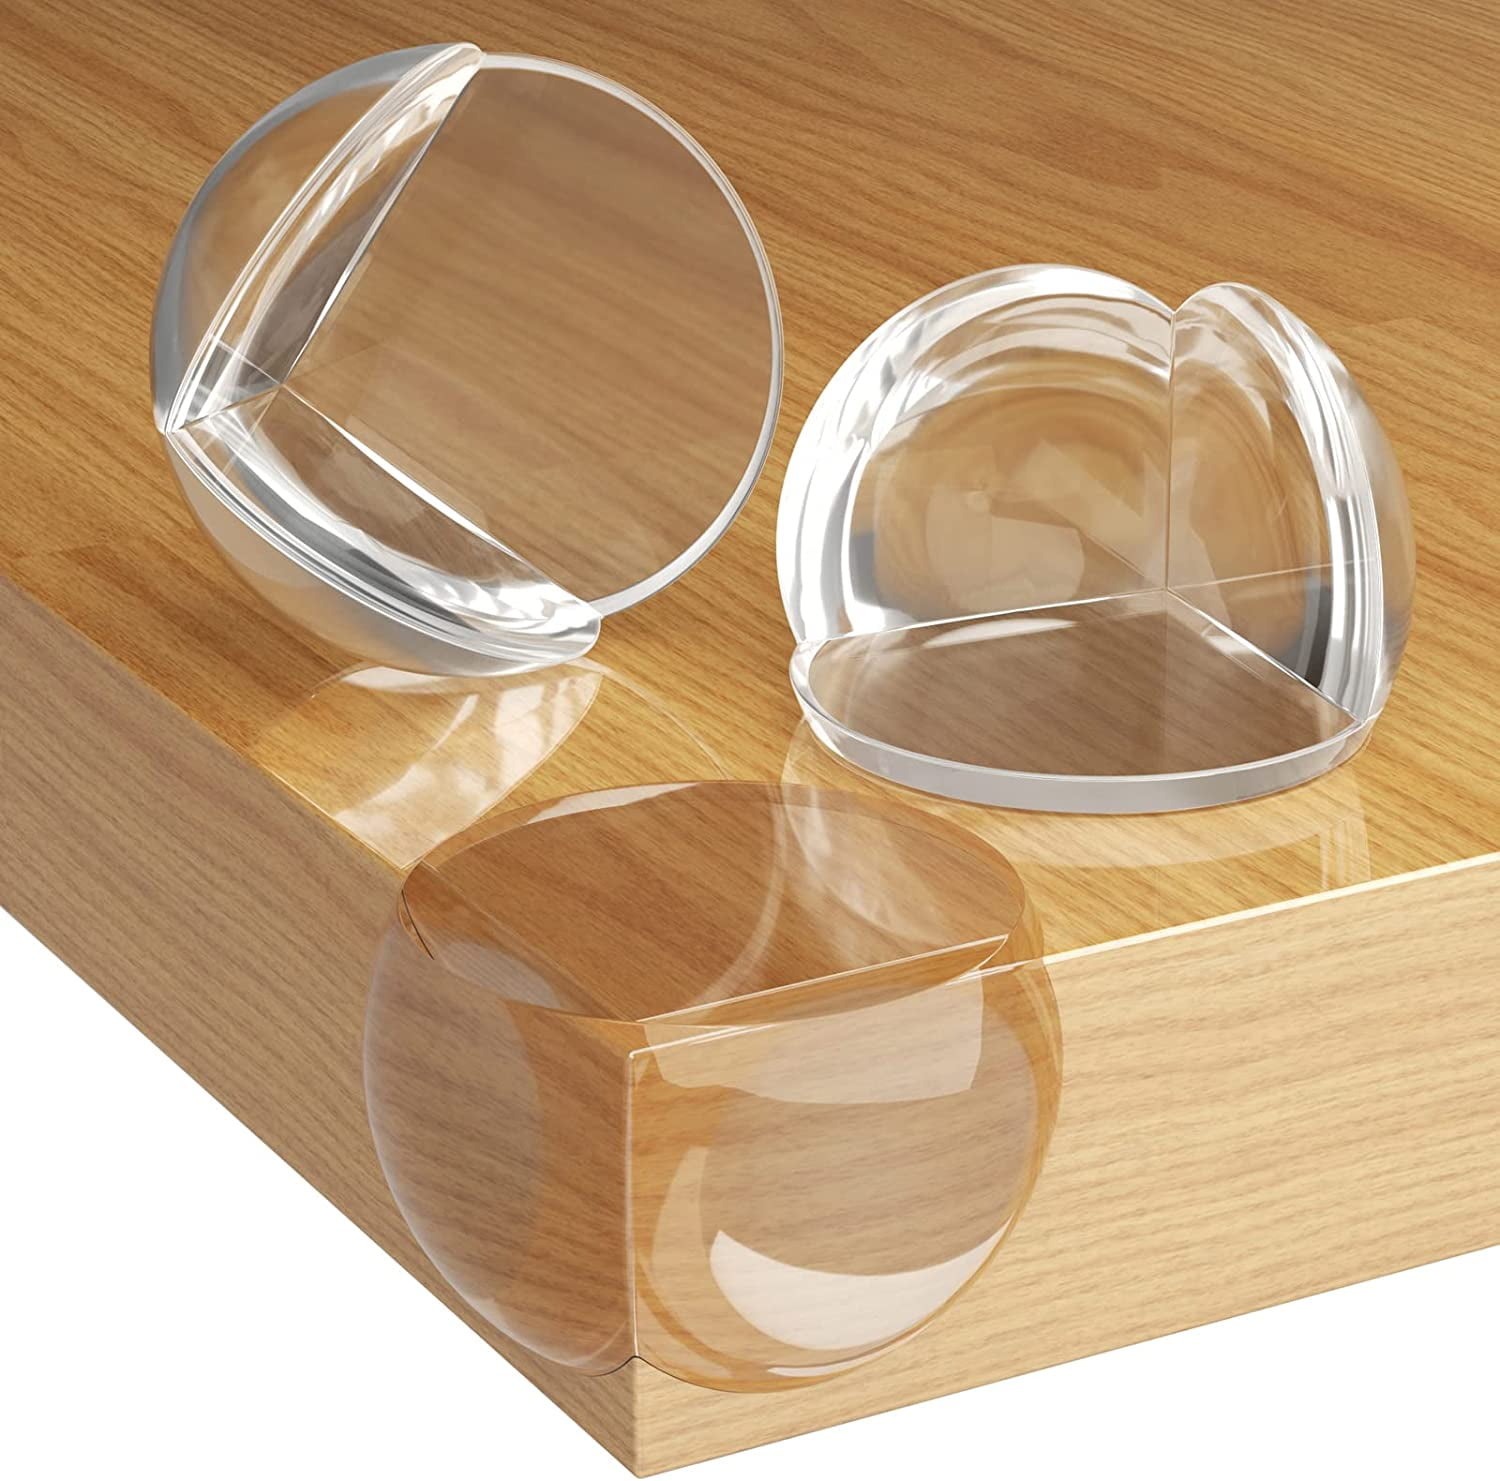 5pc freeshipping baby safety product baby proofing glass table